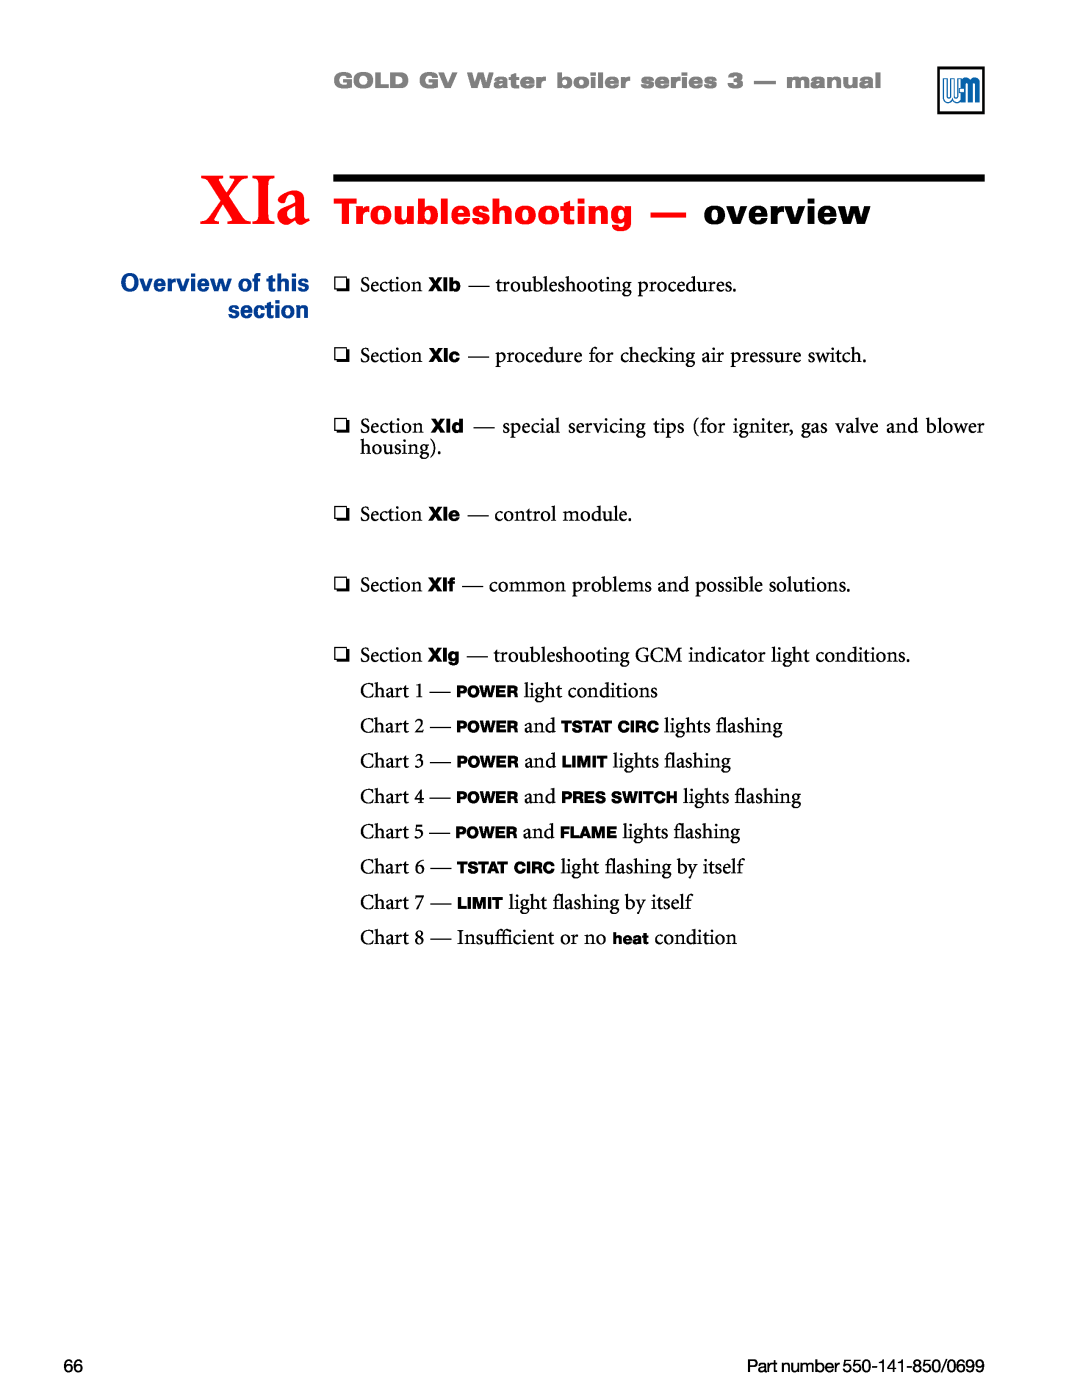 Weil-McLain GOLD DV WATER BOILER, 550-141-850/0599 manual XIa Troubleshooting - overview, Overview of this section 